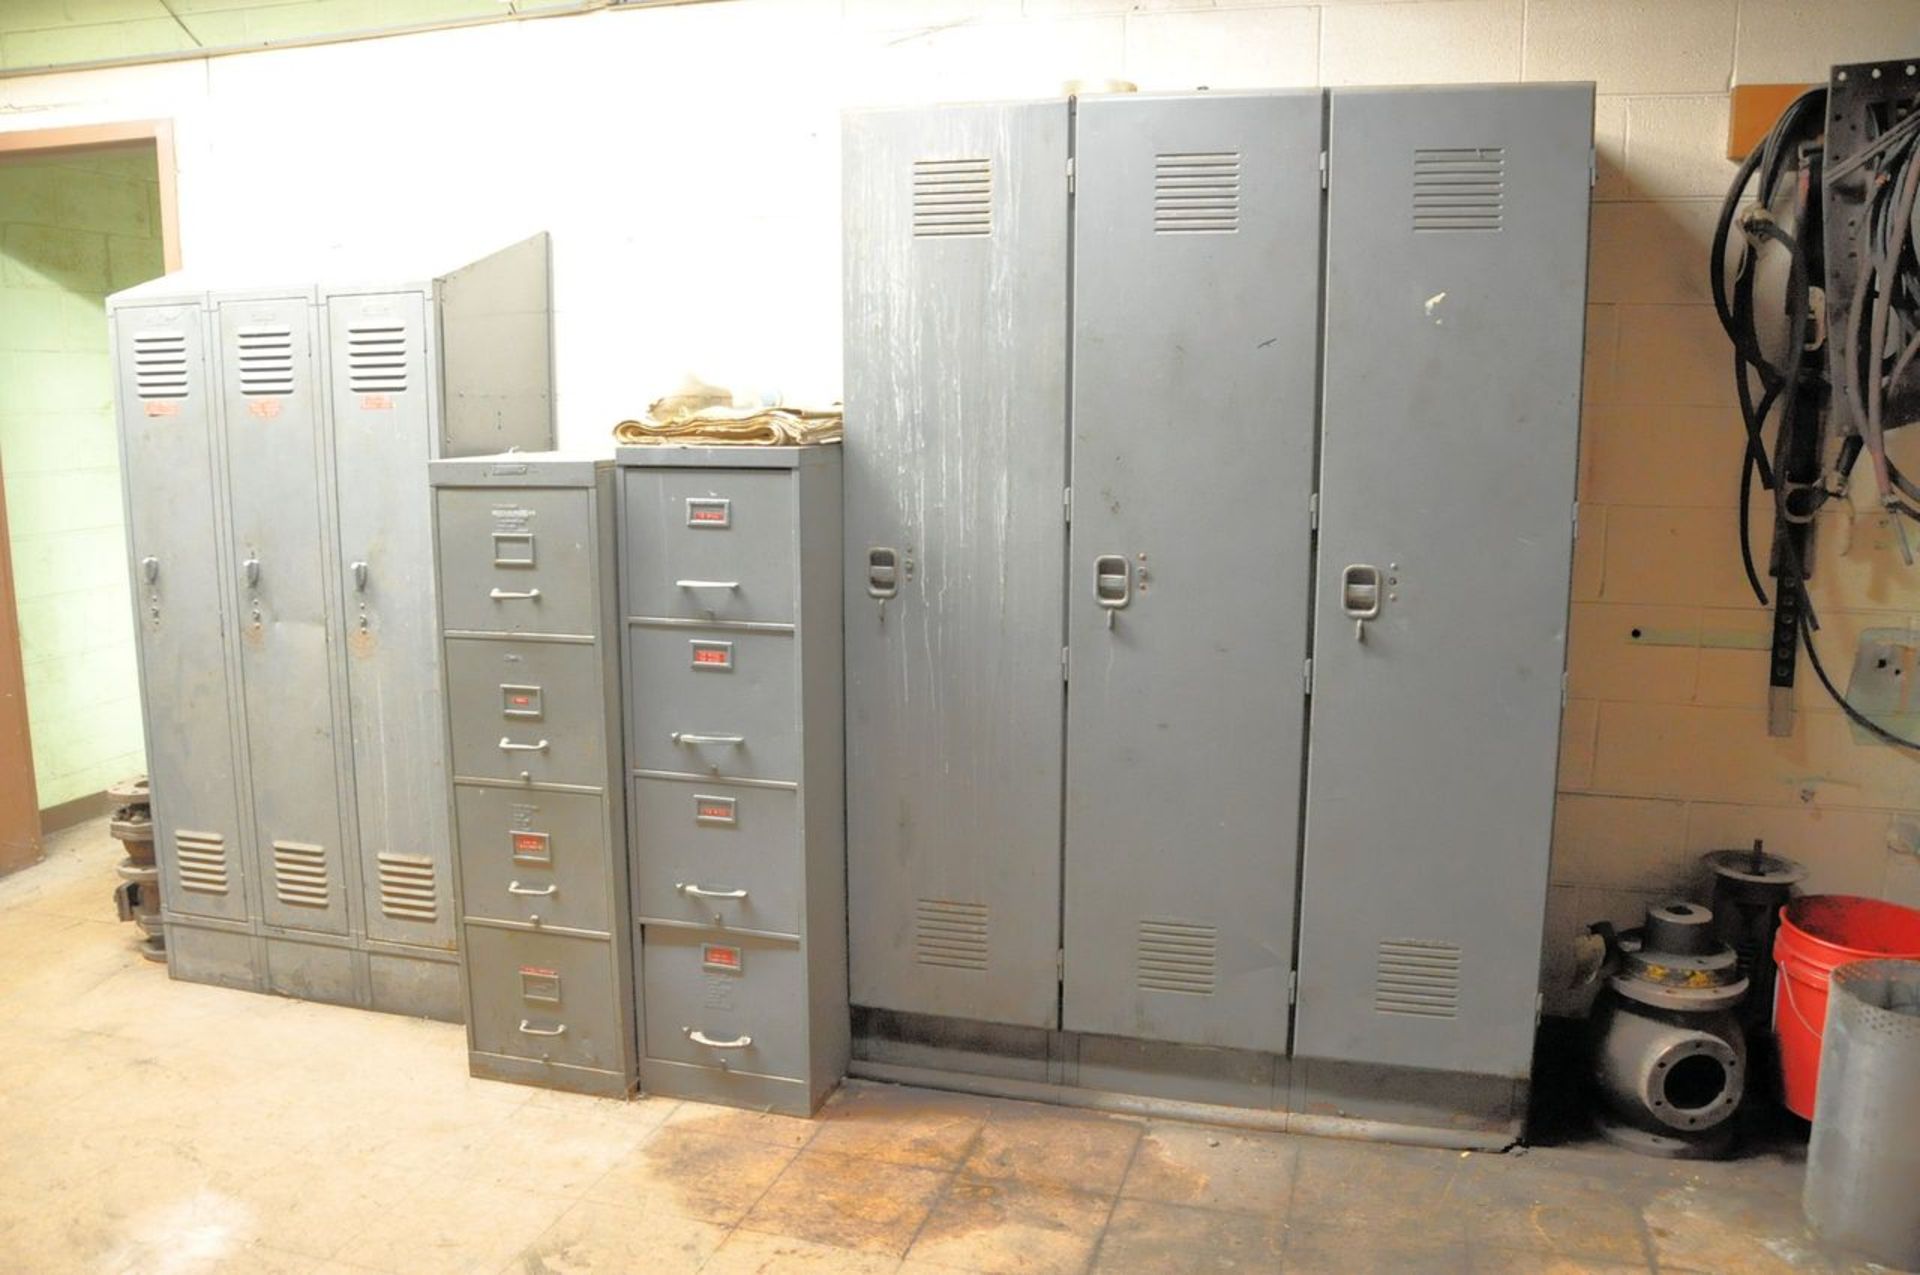 Lot - Various Machine Parts, Lockers, File Cabinets, Blueprint Cabinet in (1) Office, (No Files, - Image 4 of 10